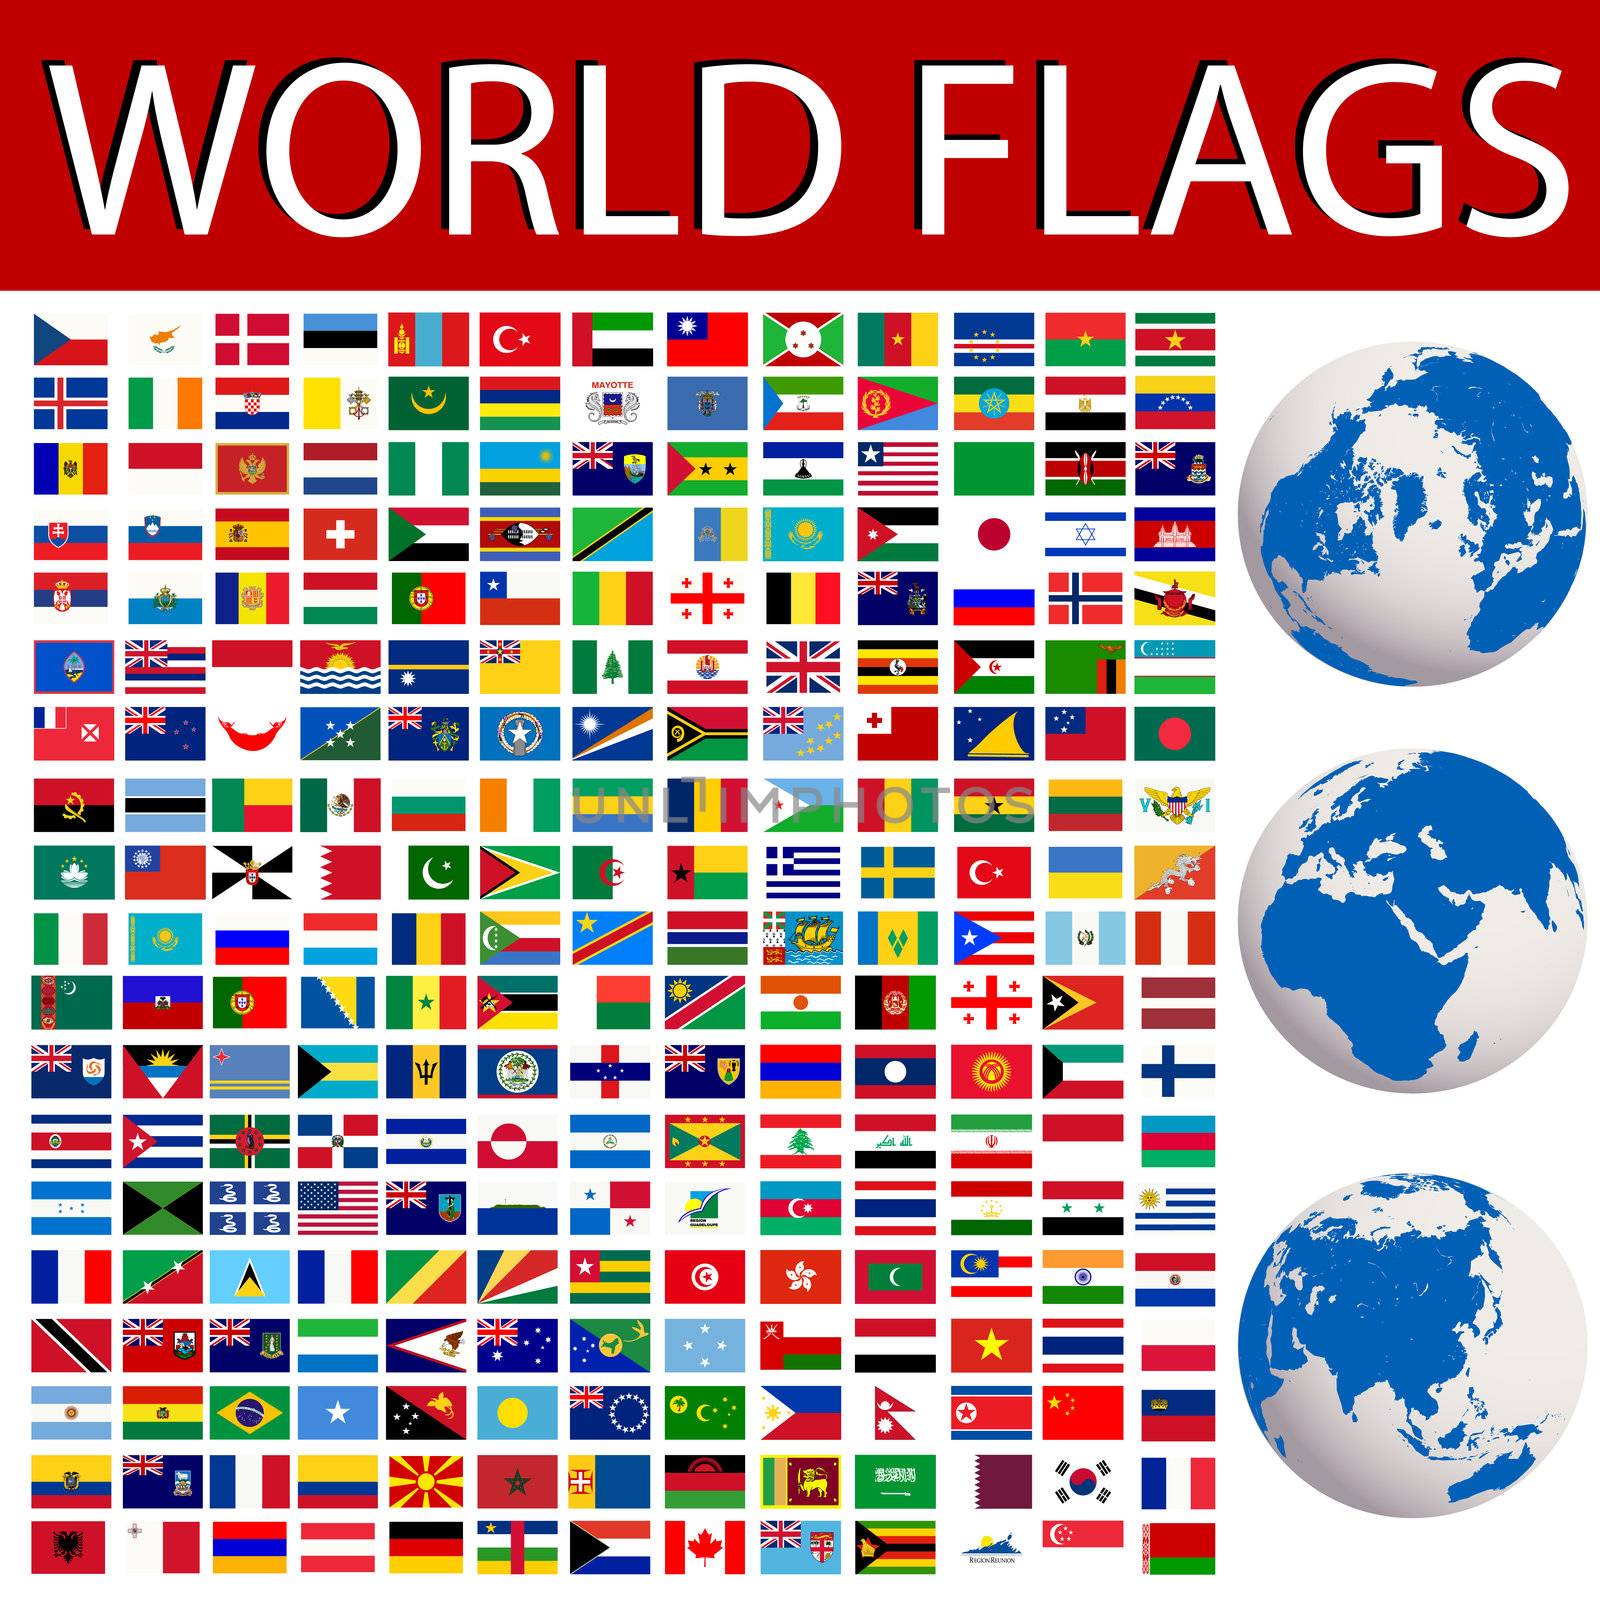 World flags by Lirch